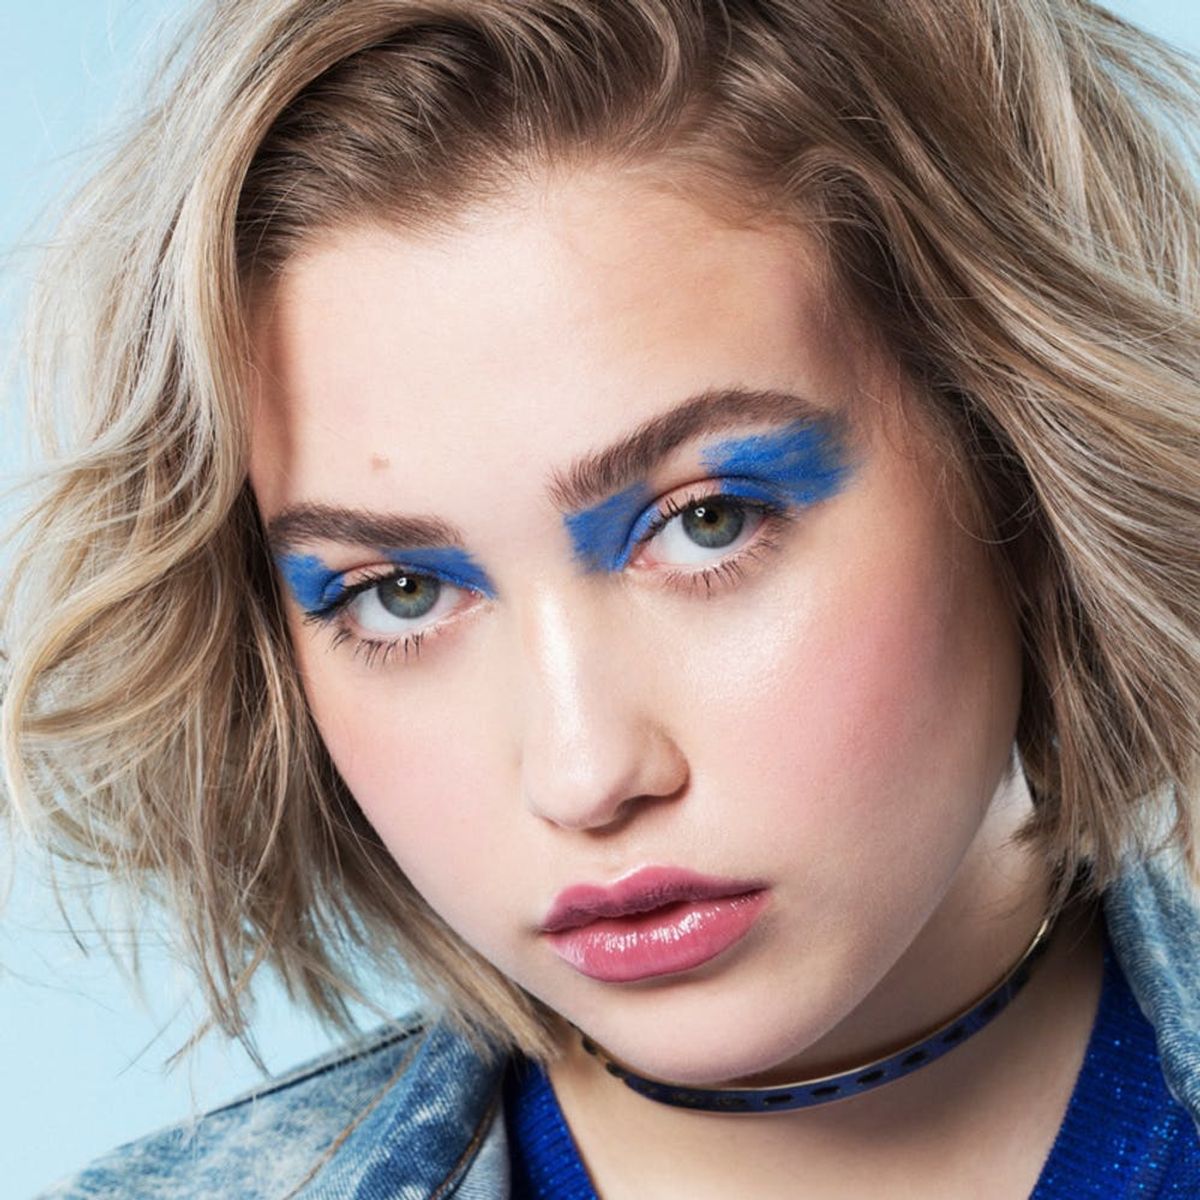 Milk Makeup’s Latest Campaign Reminds Us of All the Ways We’re Awesome